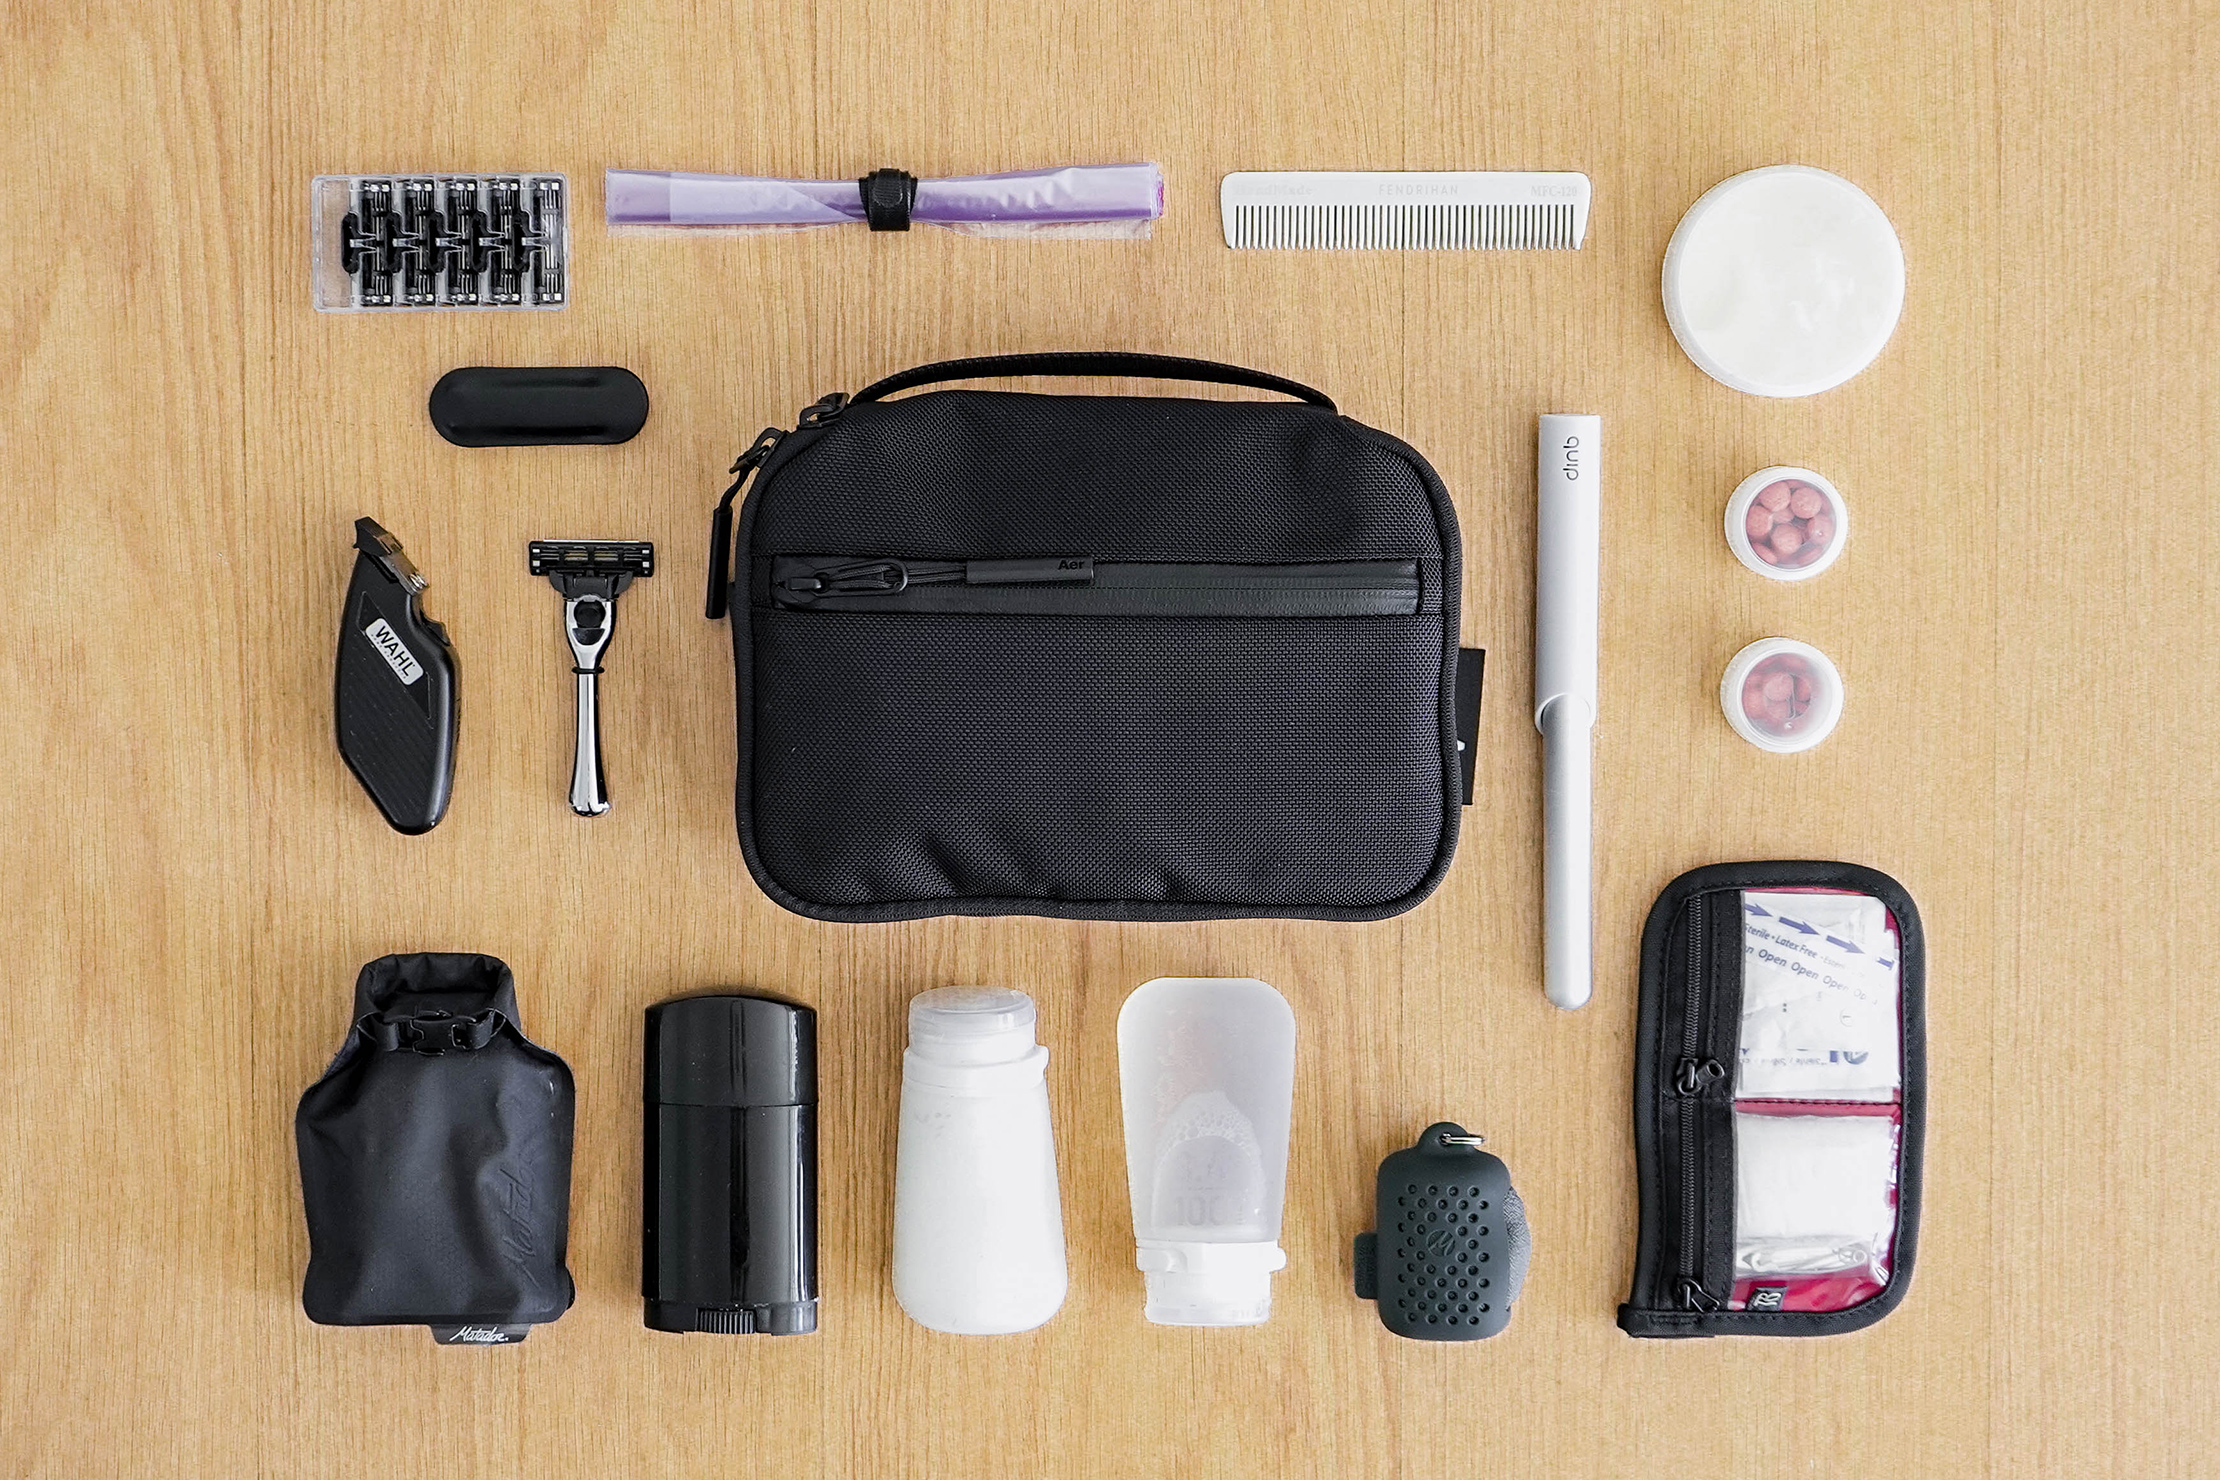 Travel kits are great for employees that are one the move quite often